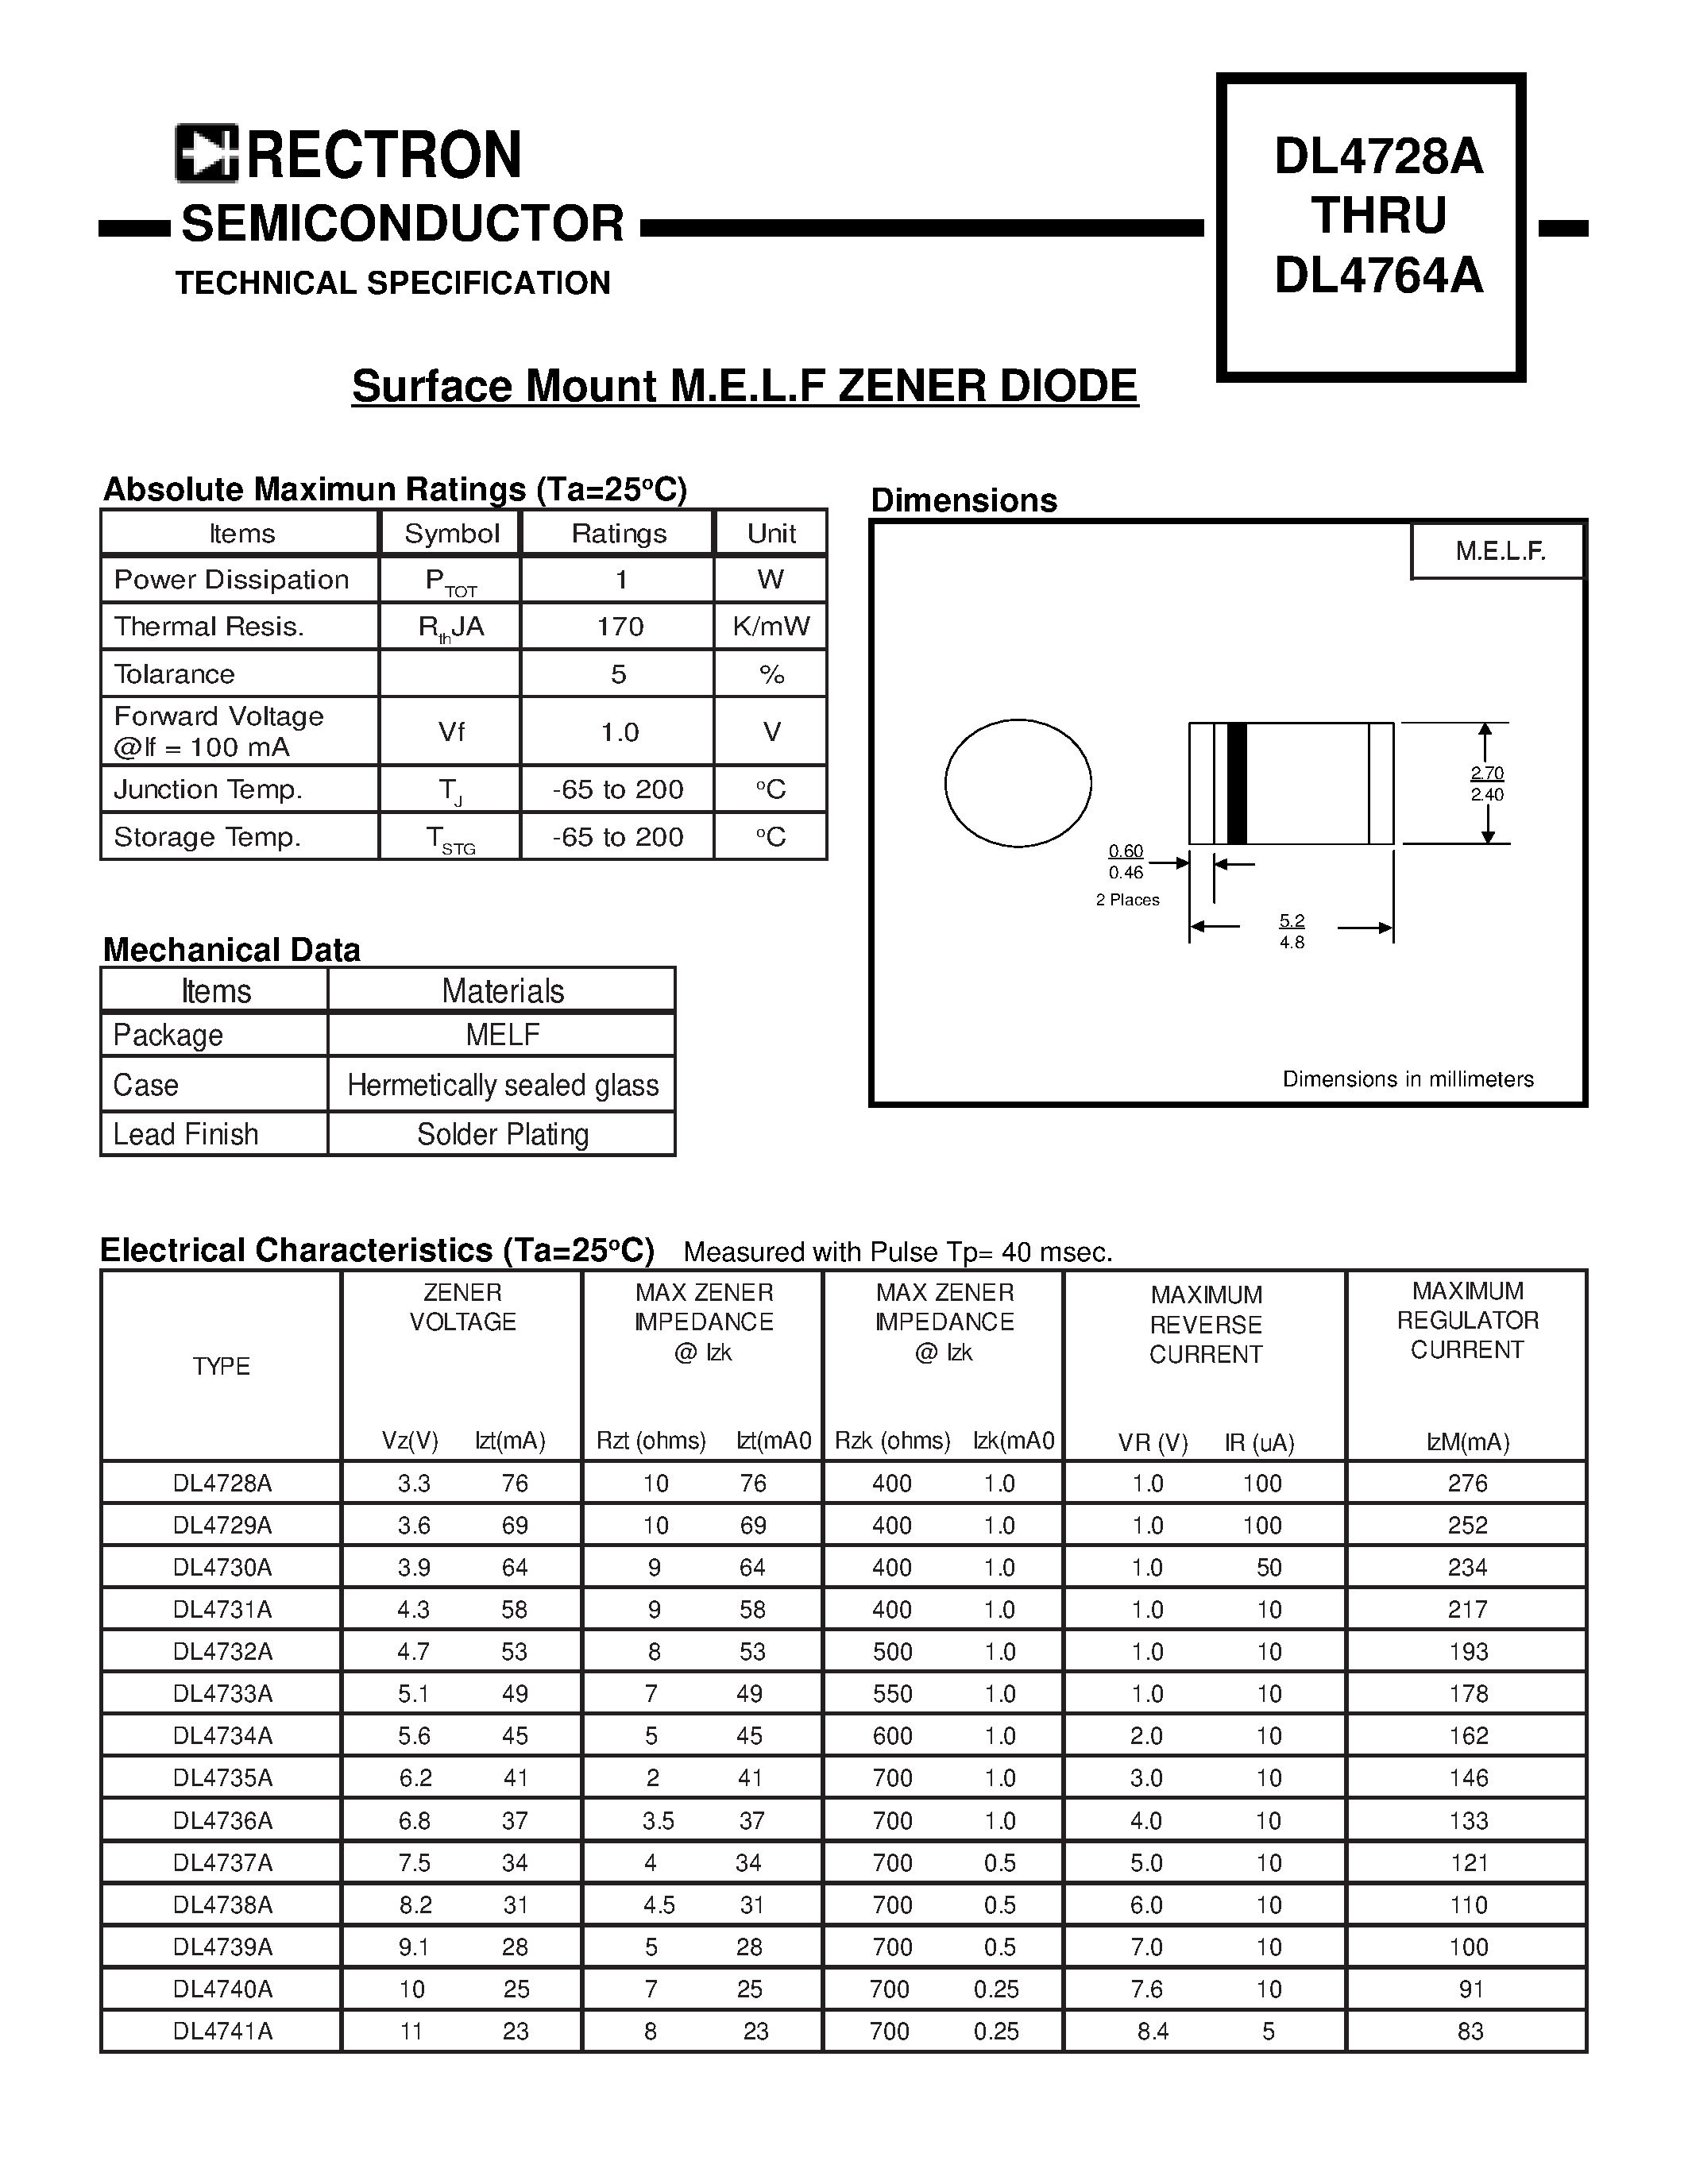 Datasheet DL4741A - Surface Mount M.E.L.F ZENER DIODE page 1